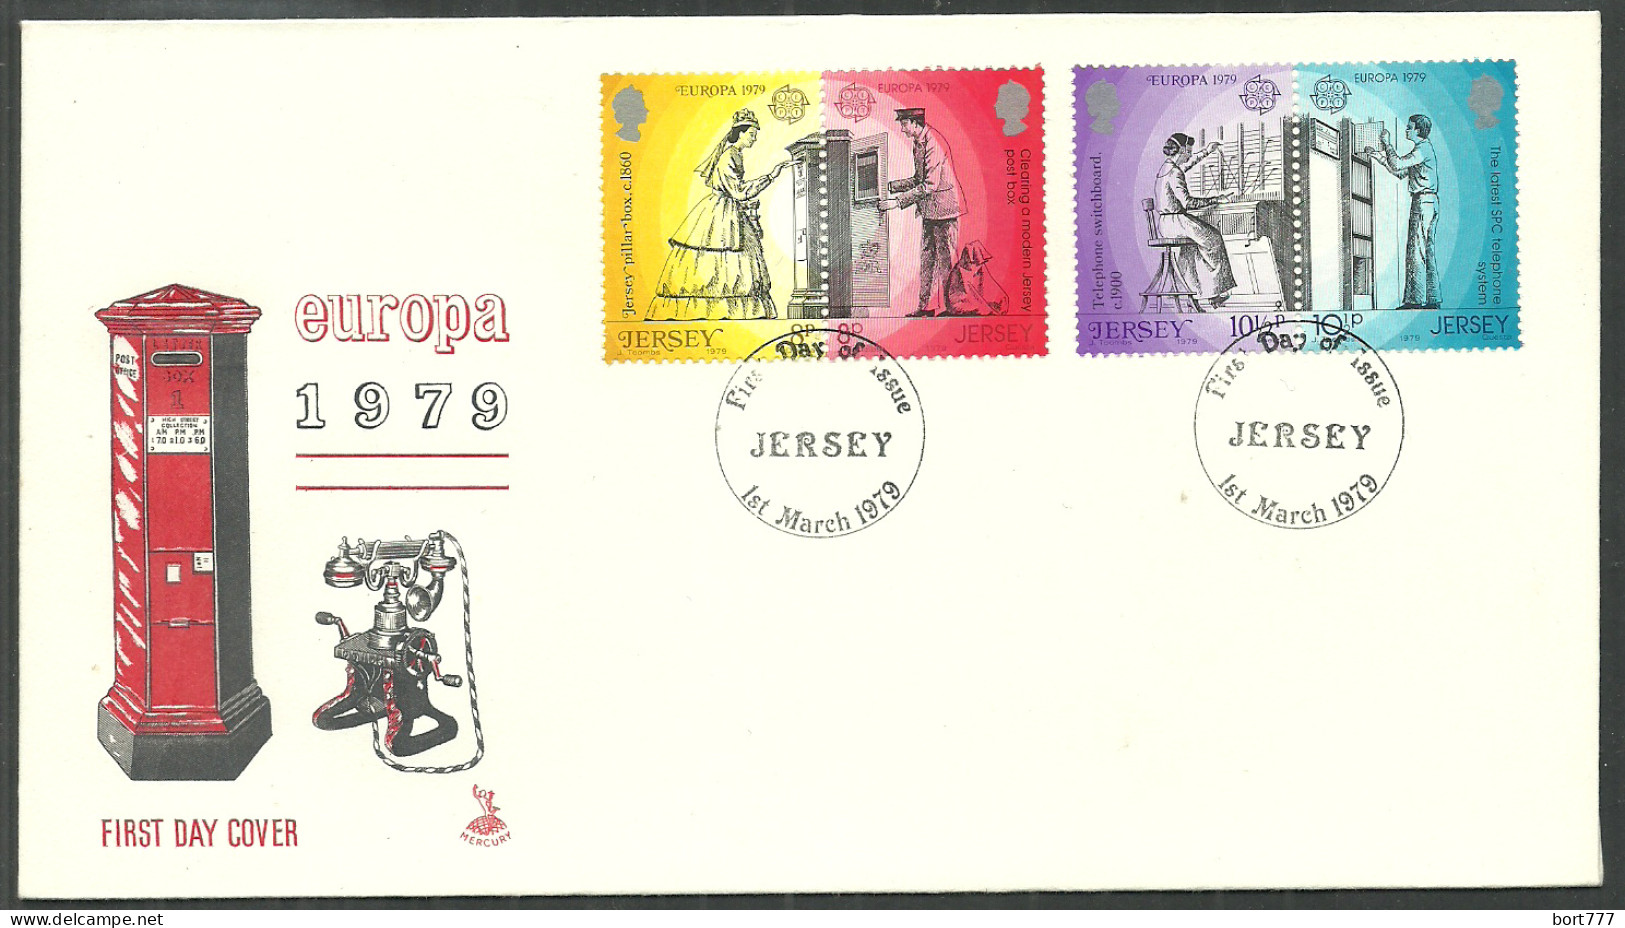 JERSEY 1979 FDC COVER - Europa Cept - Jersey